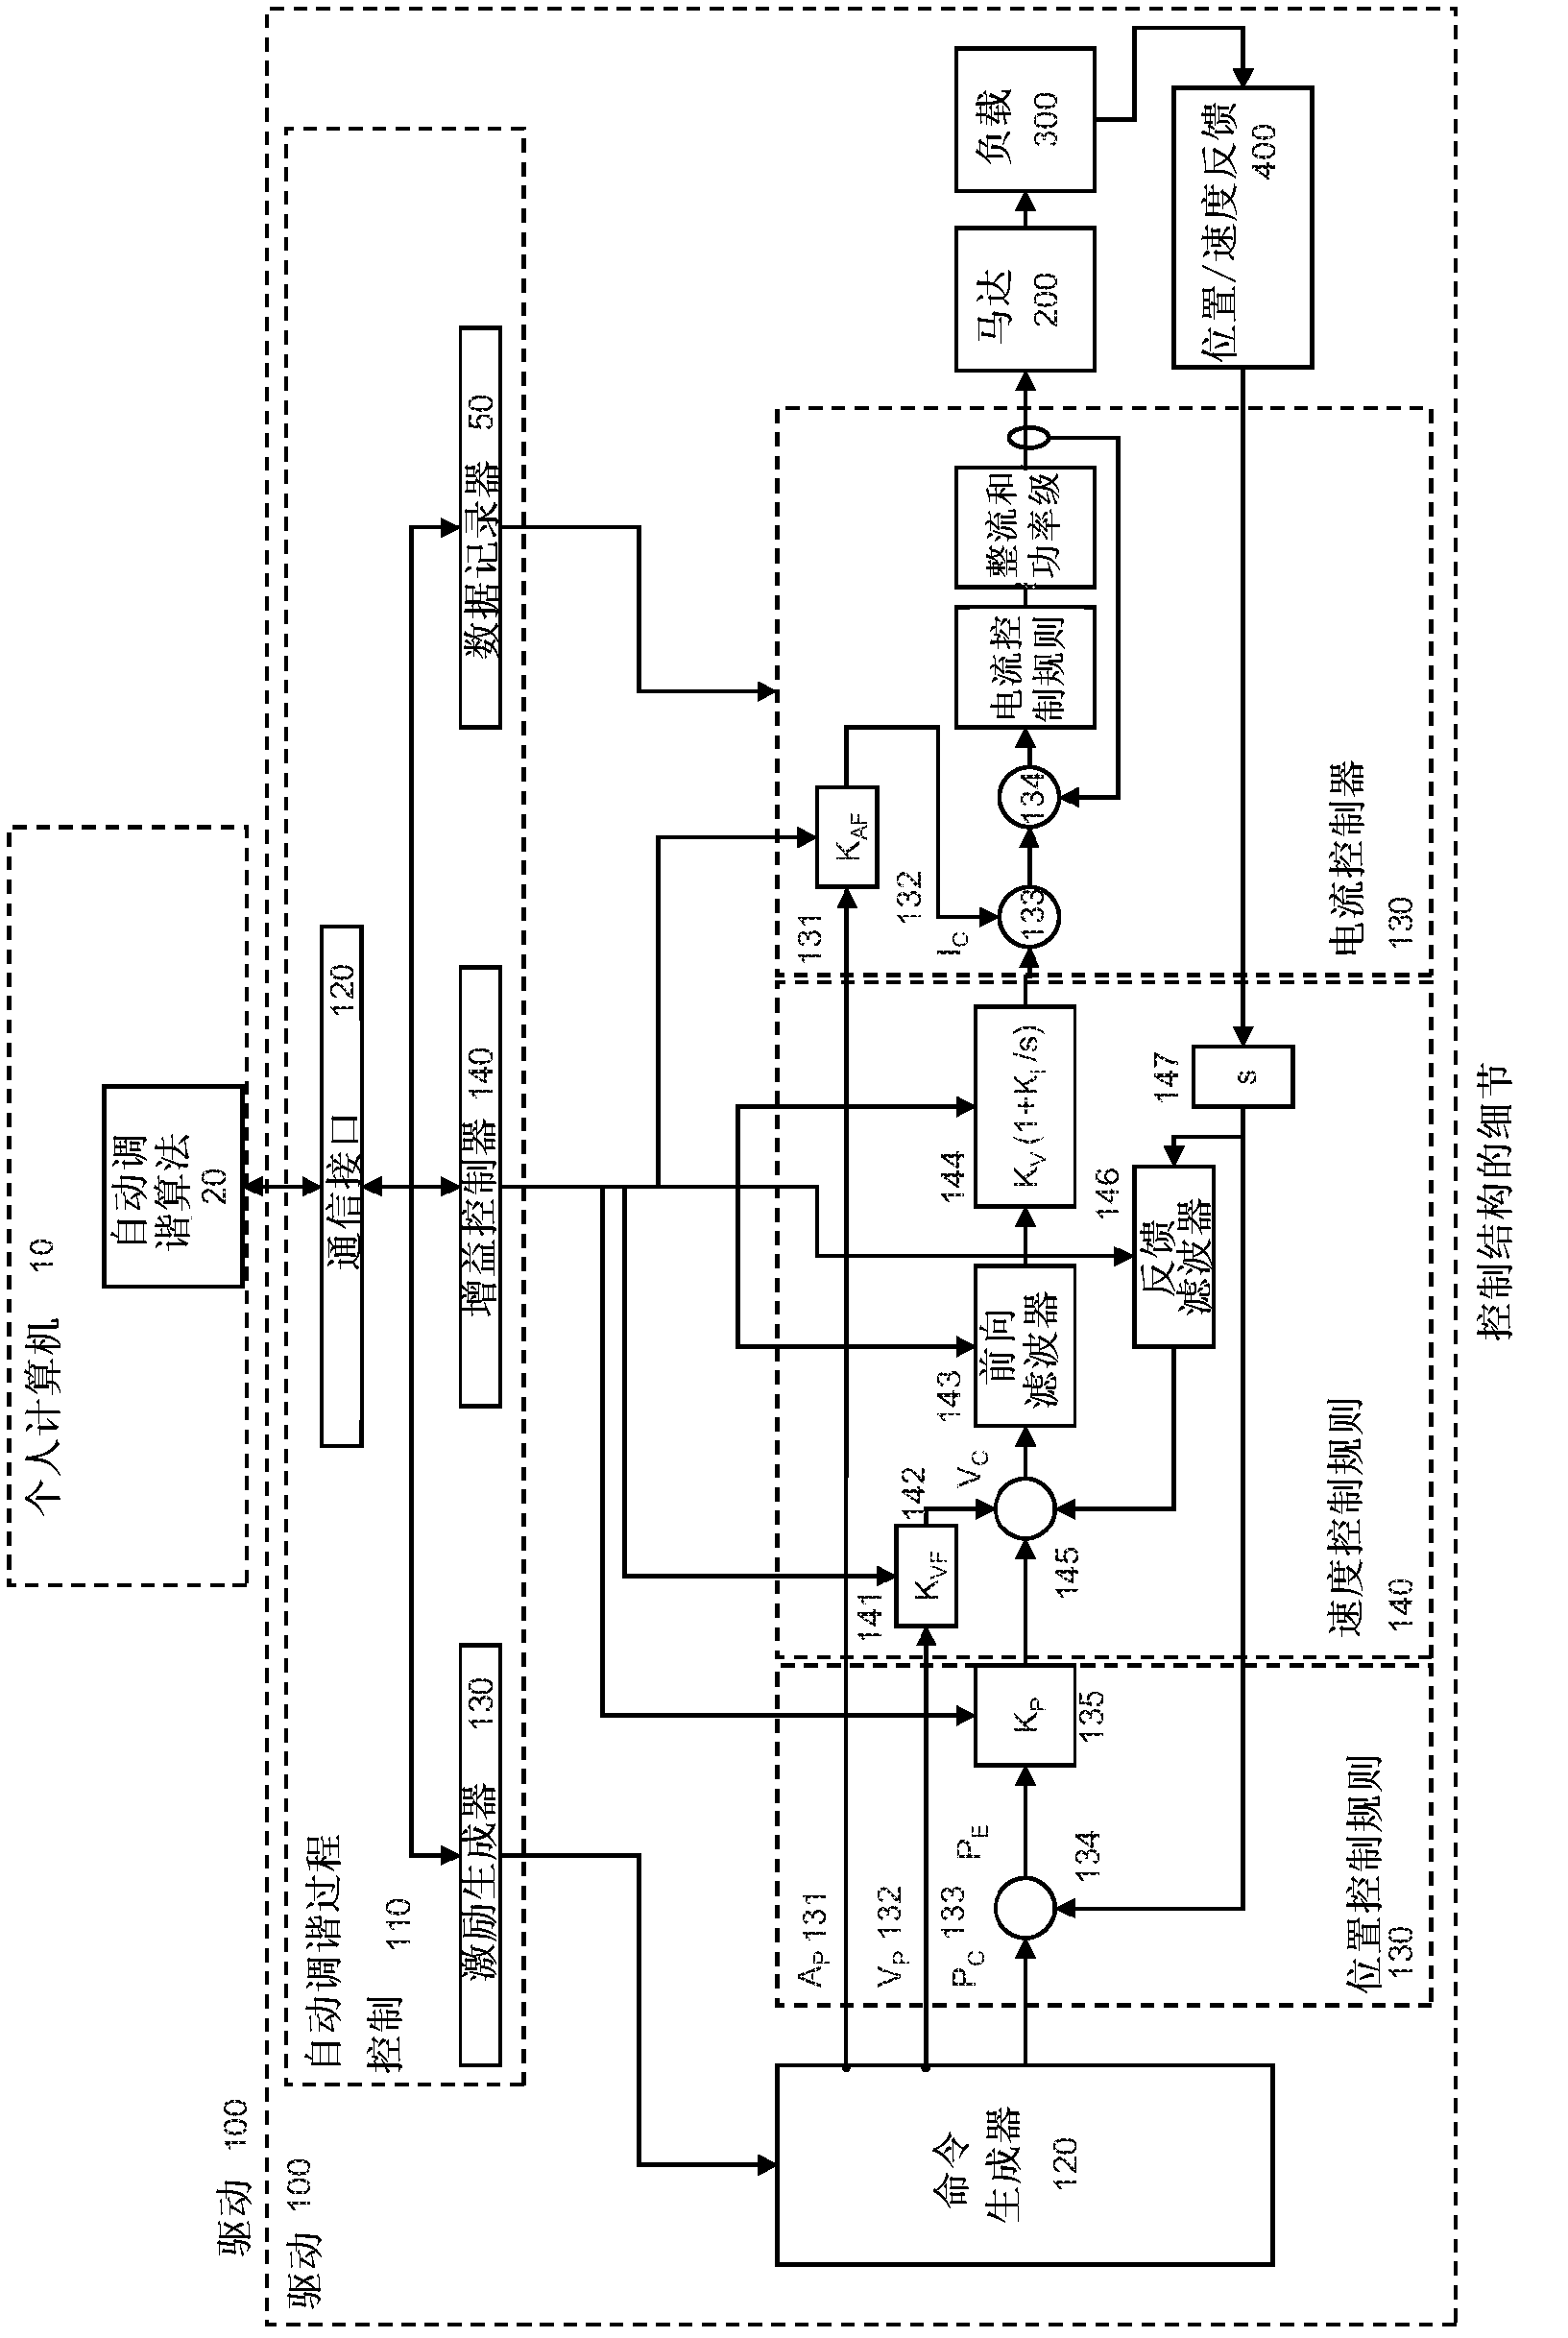 Auto-tune of a control system based on frequency response